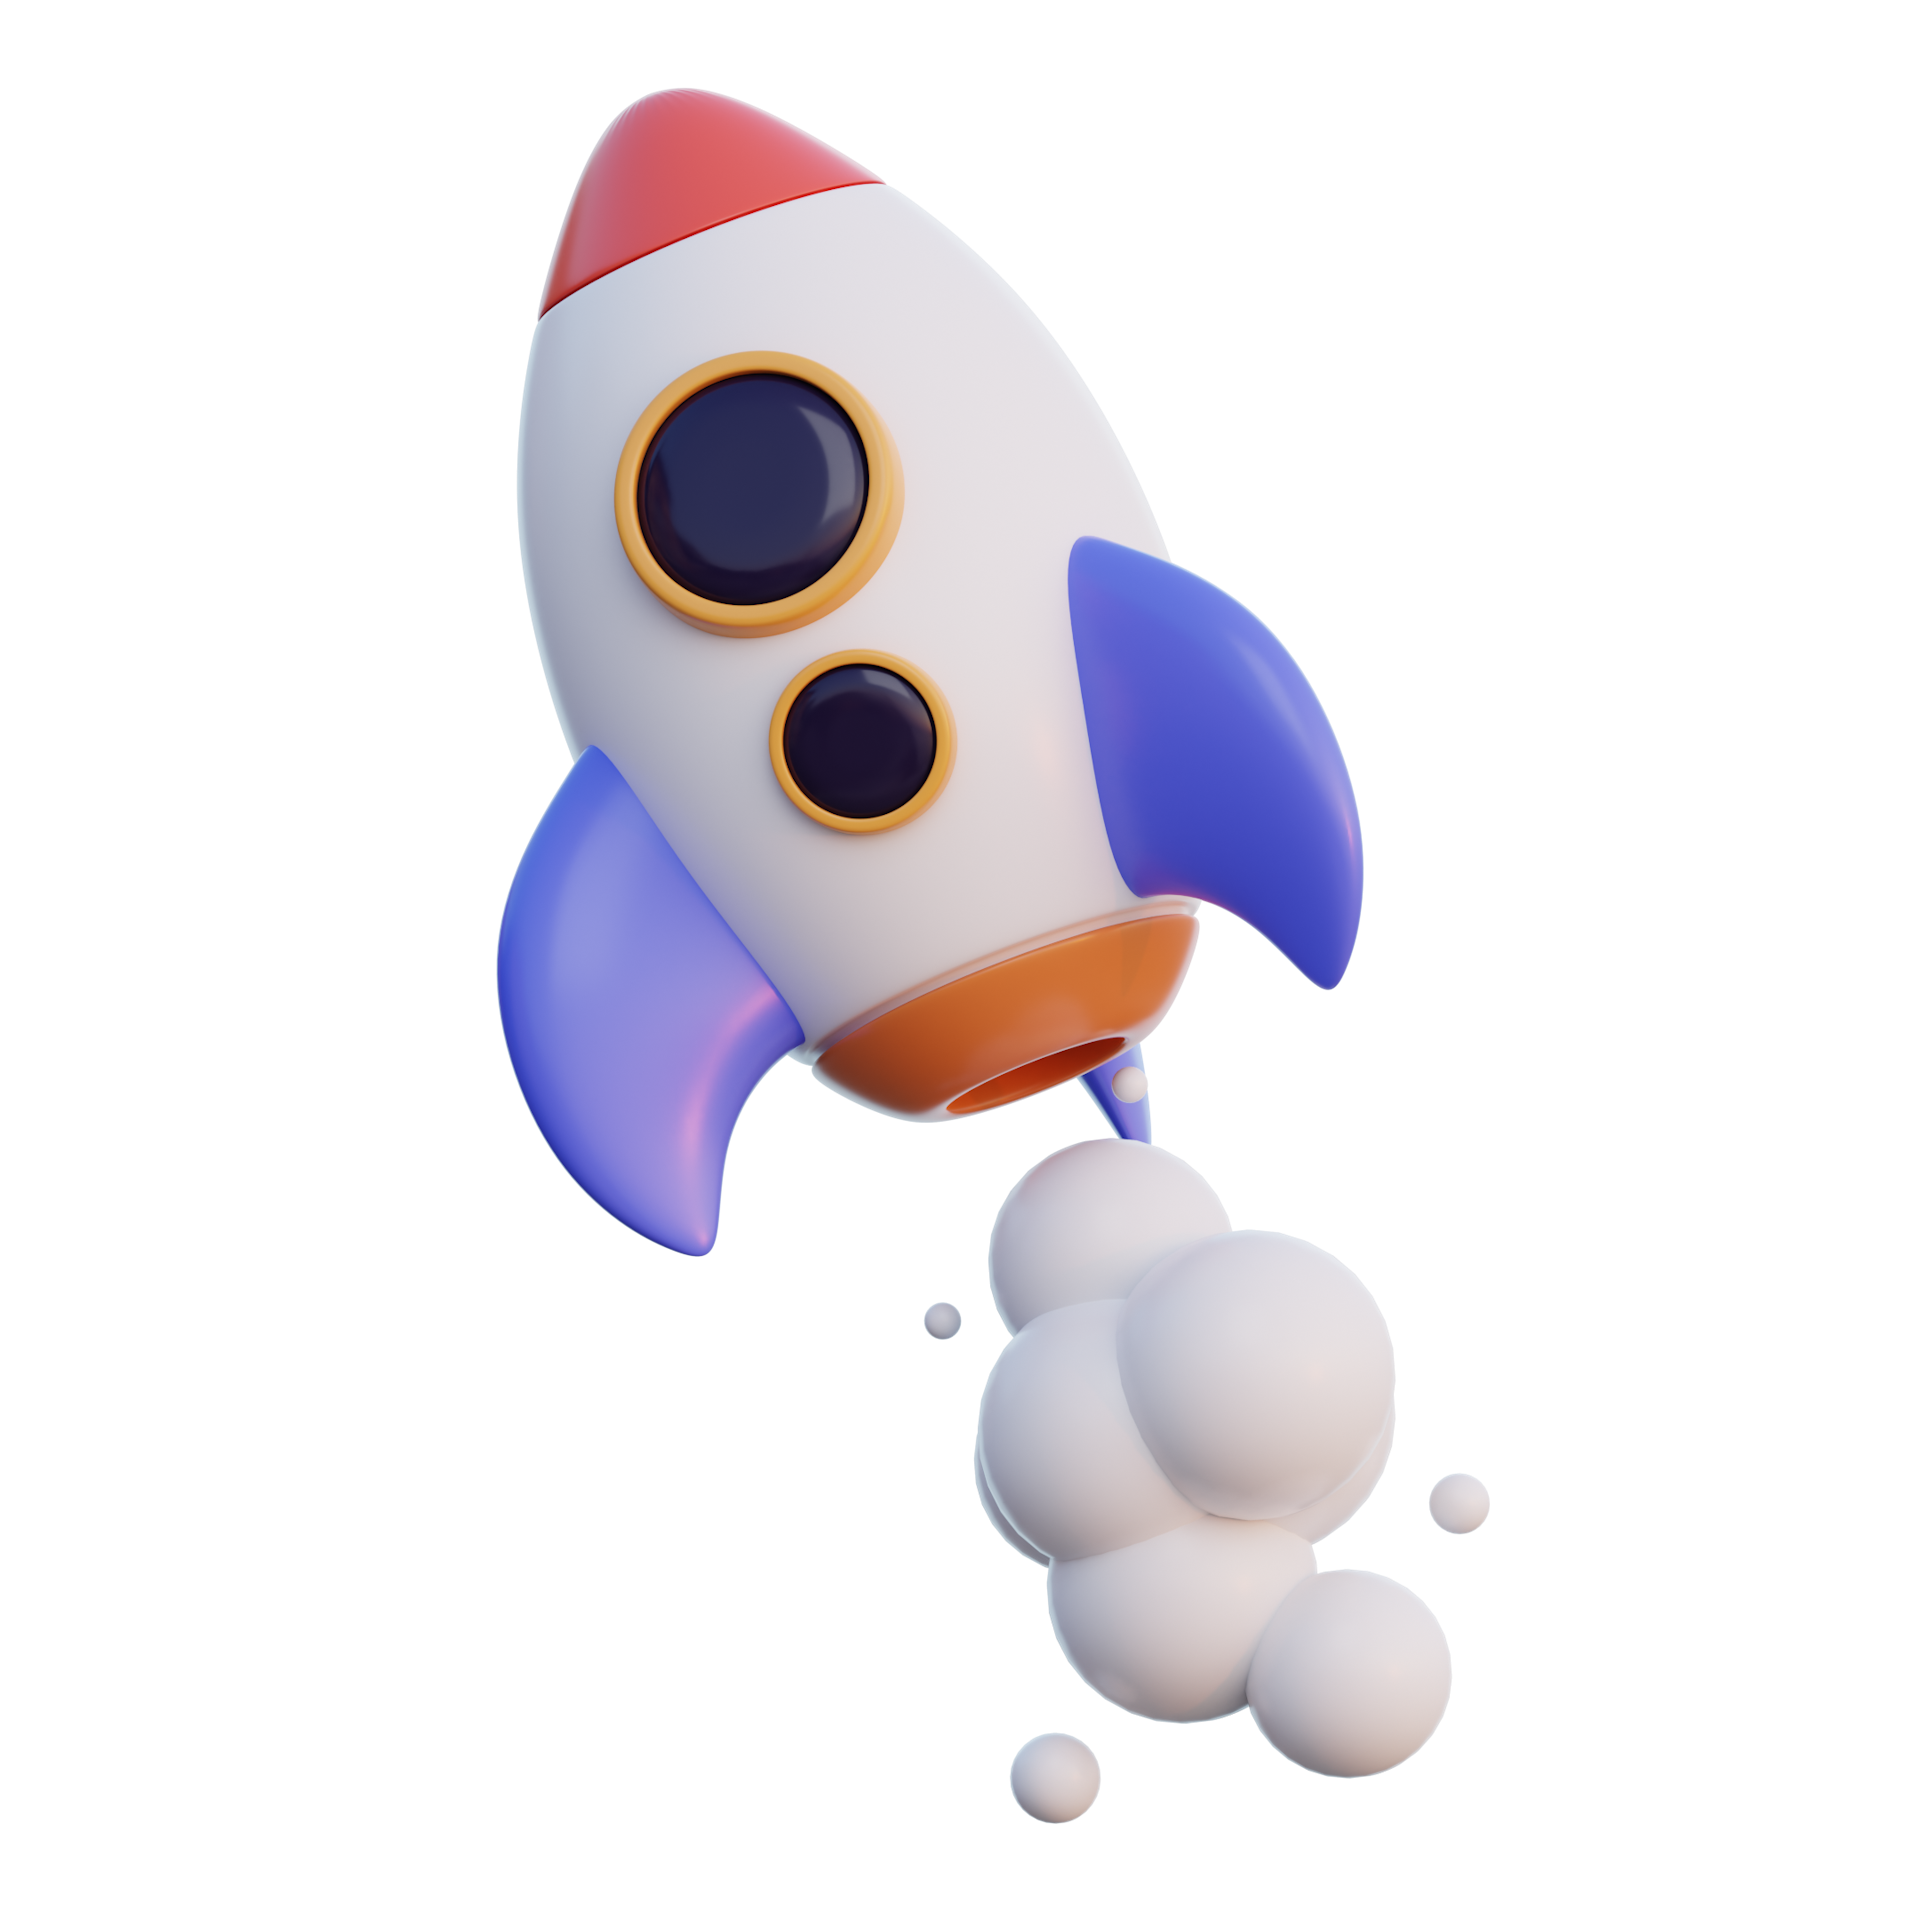 OnePager hero image: a 3D generated rocket ship